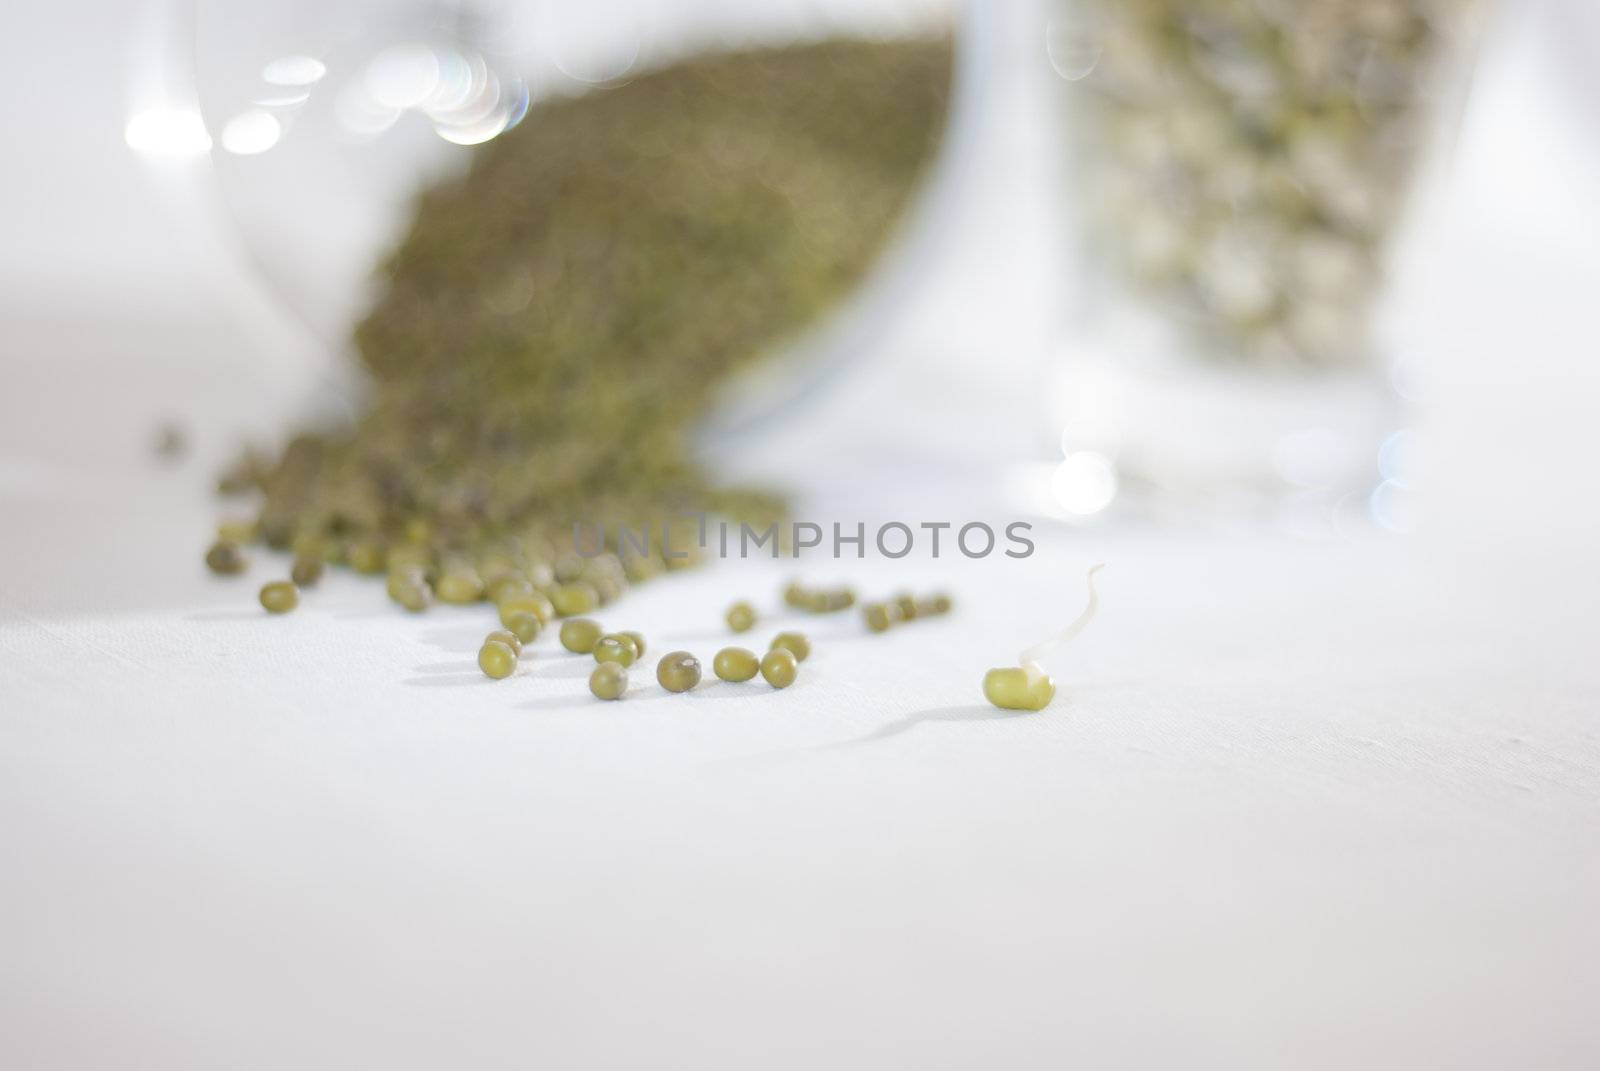 Mung beans and a mung bean sprout spilling out of glass jars